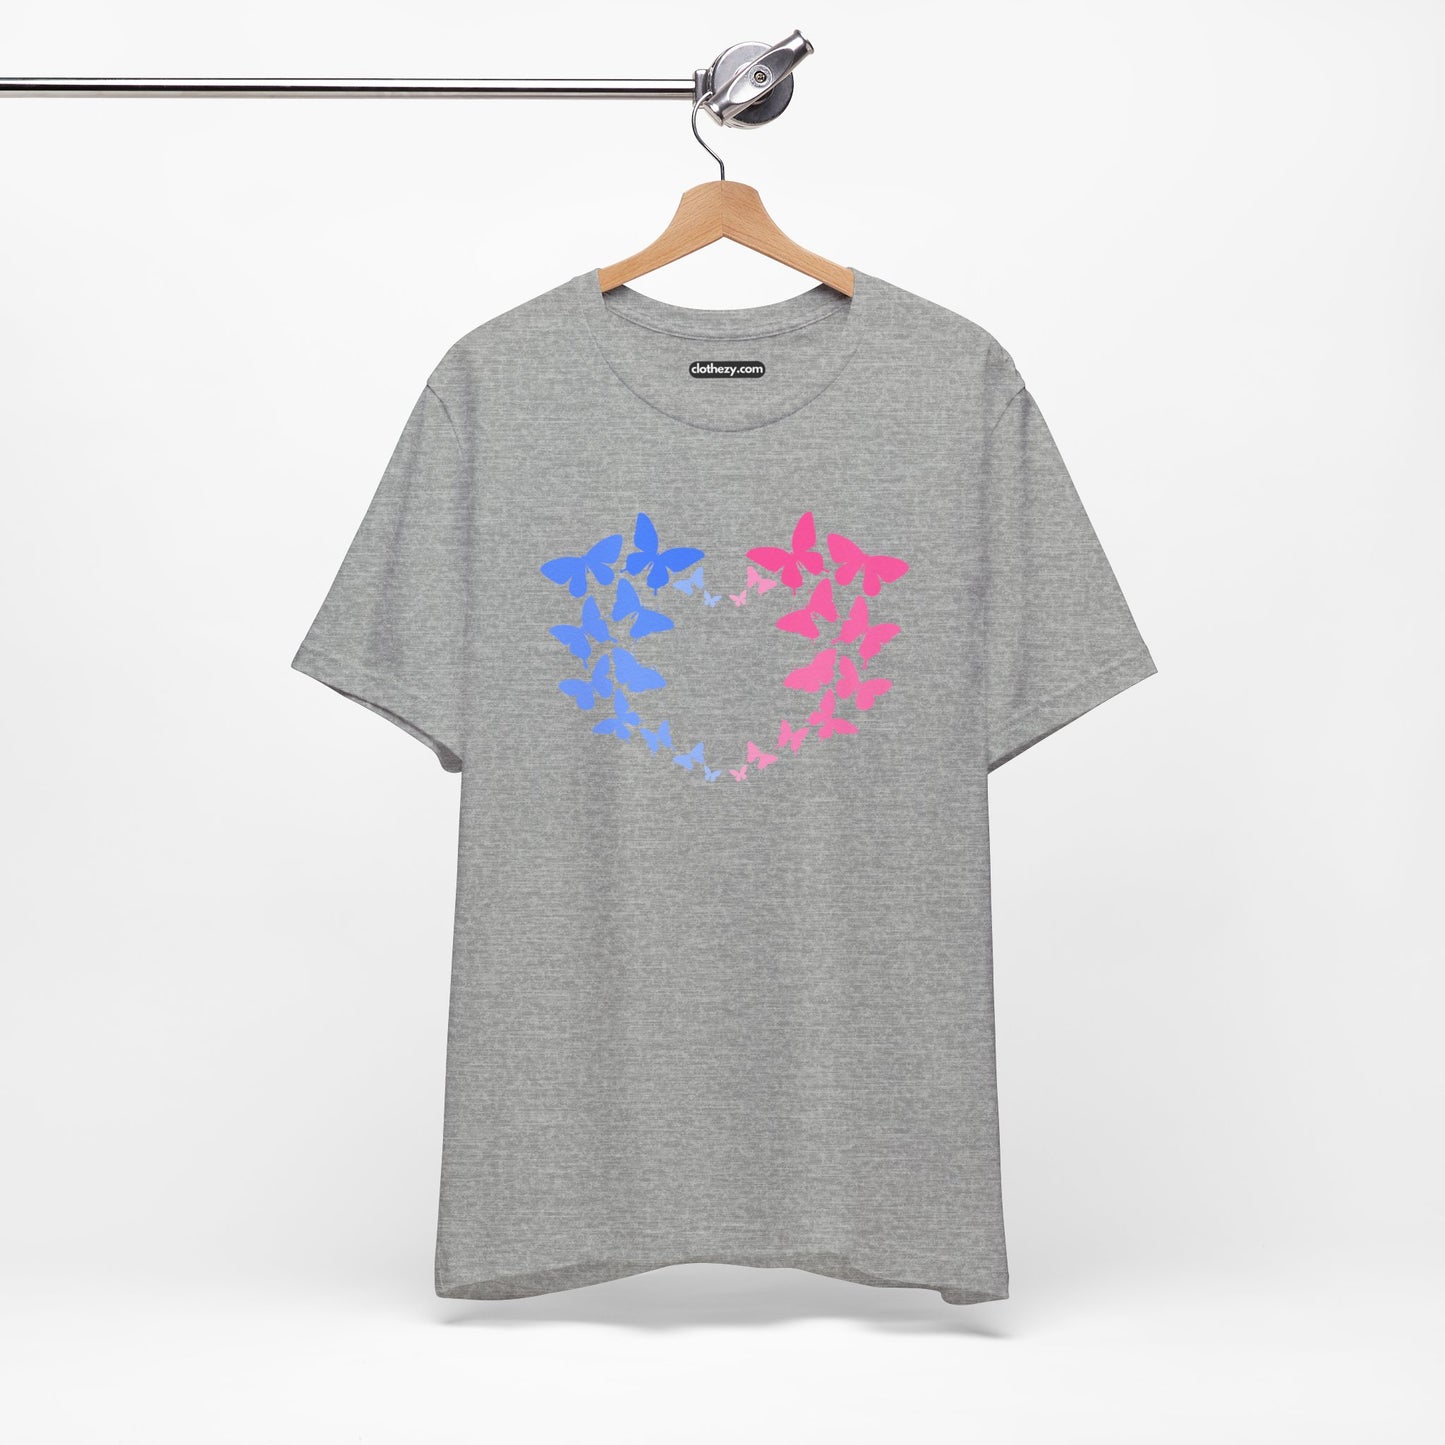 Blue and Pink Butterfly Heart - Soft Cotton Adult Unisex T-Shirt, Gift for friends and family, Gift for friends and family by clothezy.com - Buy Now